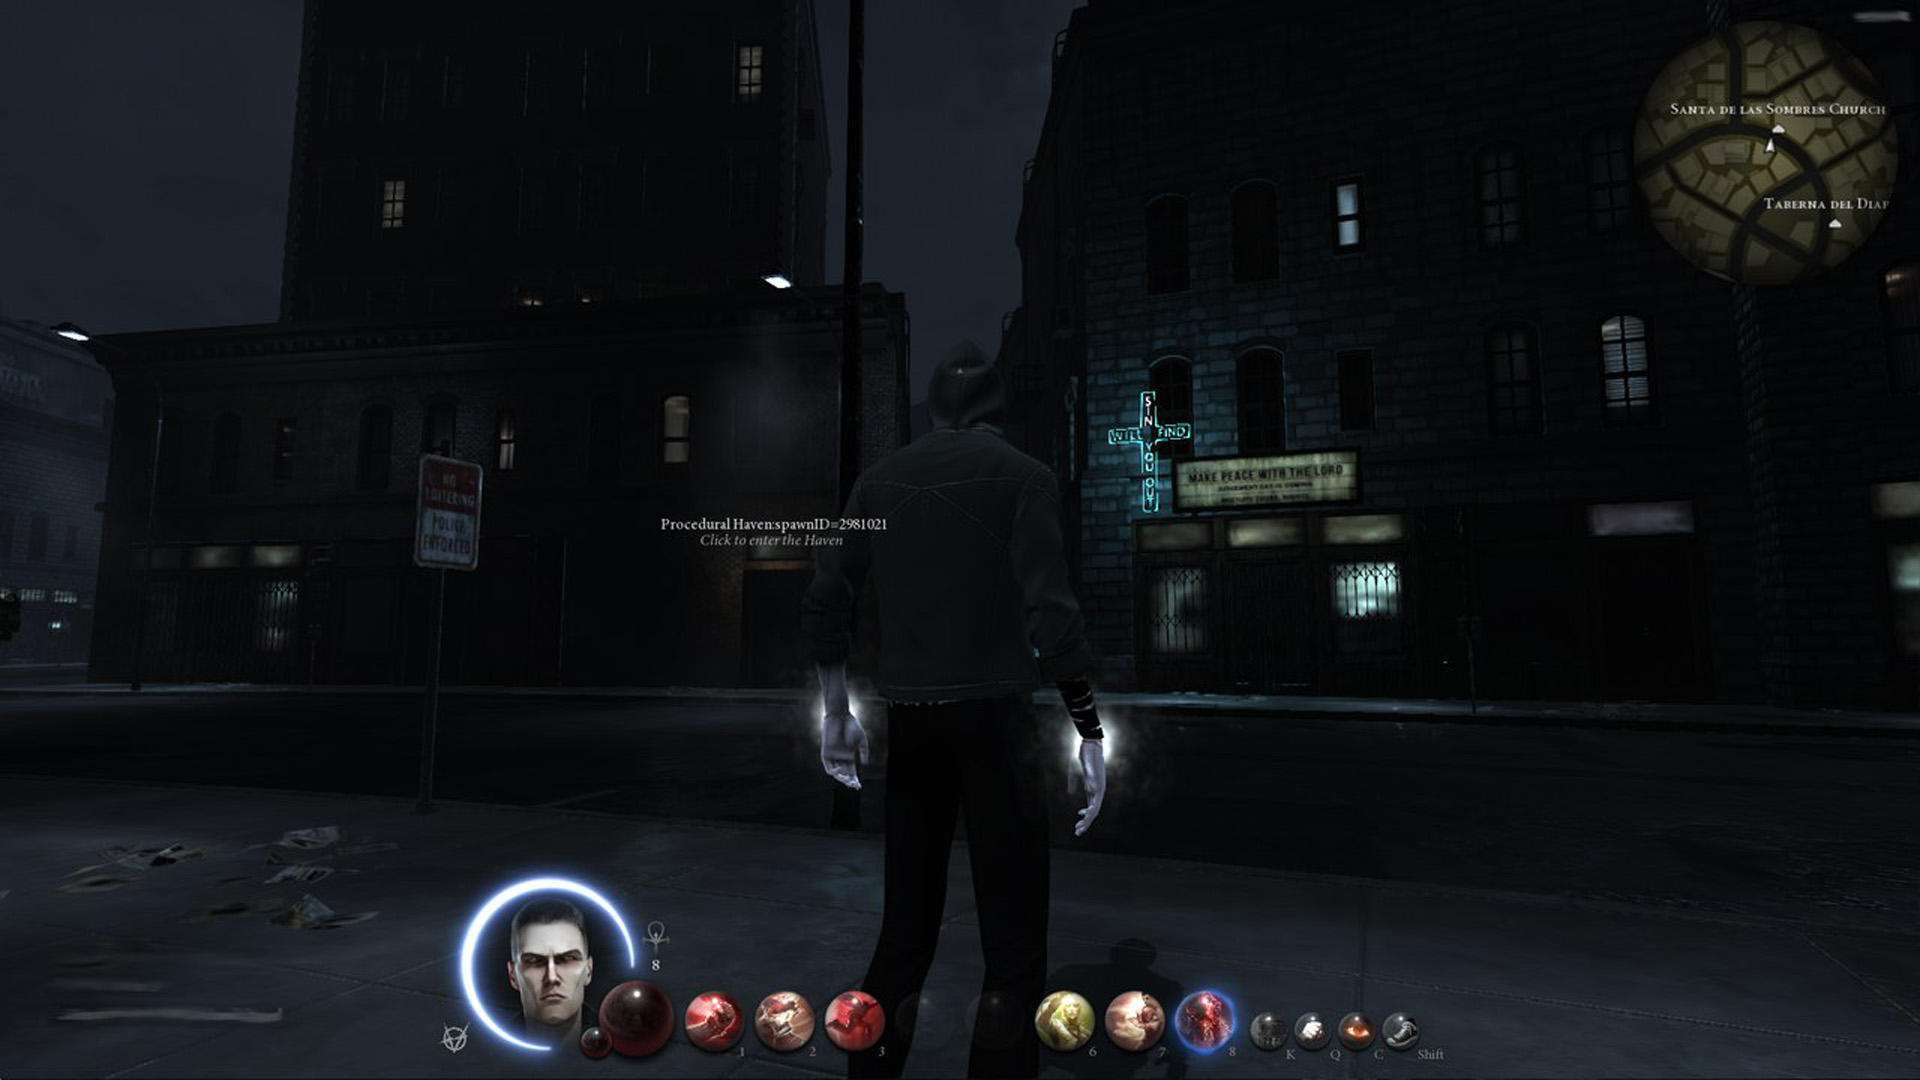 Appropriately Dark Screens From The Cancelled World Of Darkness MMO